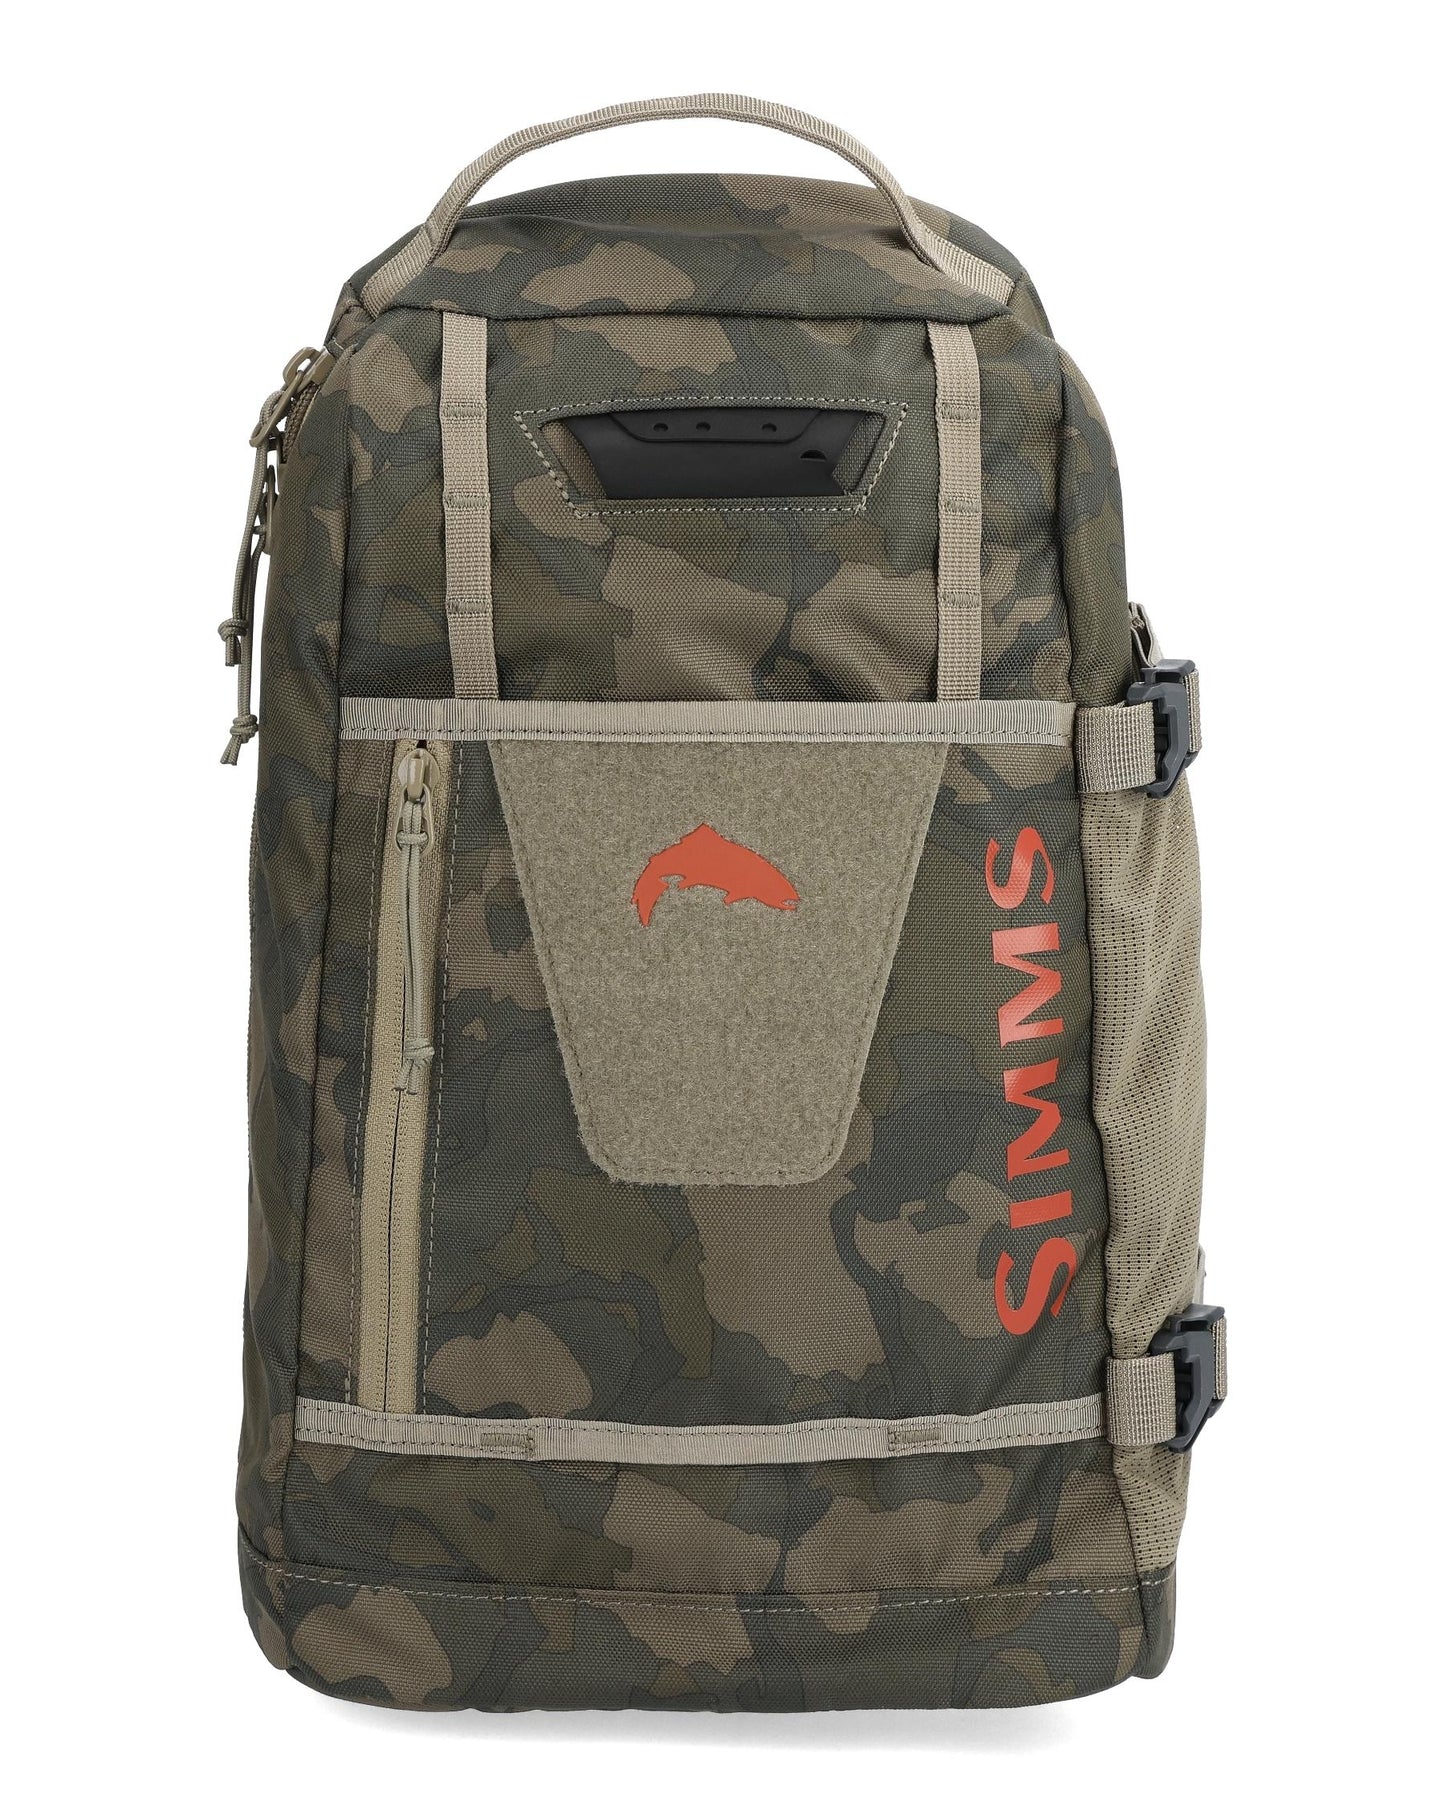 Simms Tributary Sling Pack - Duranglers Fly Fishing Shop & Guides